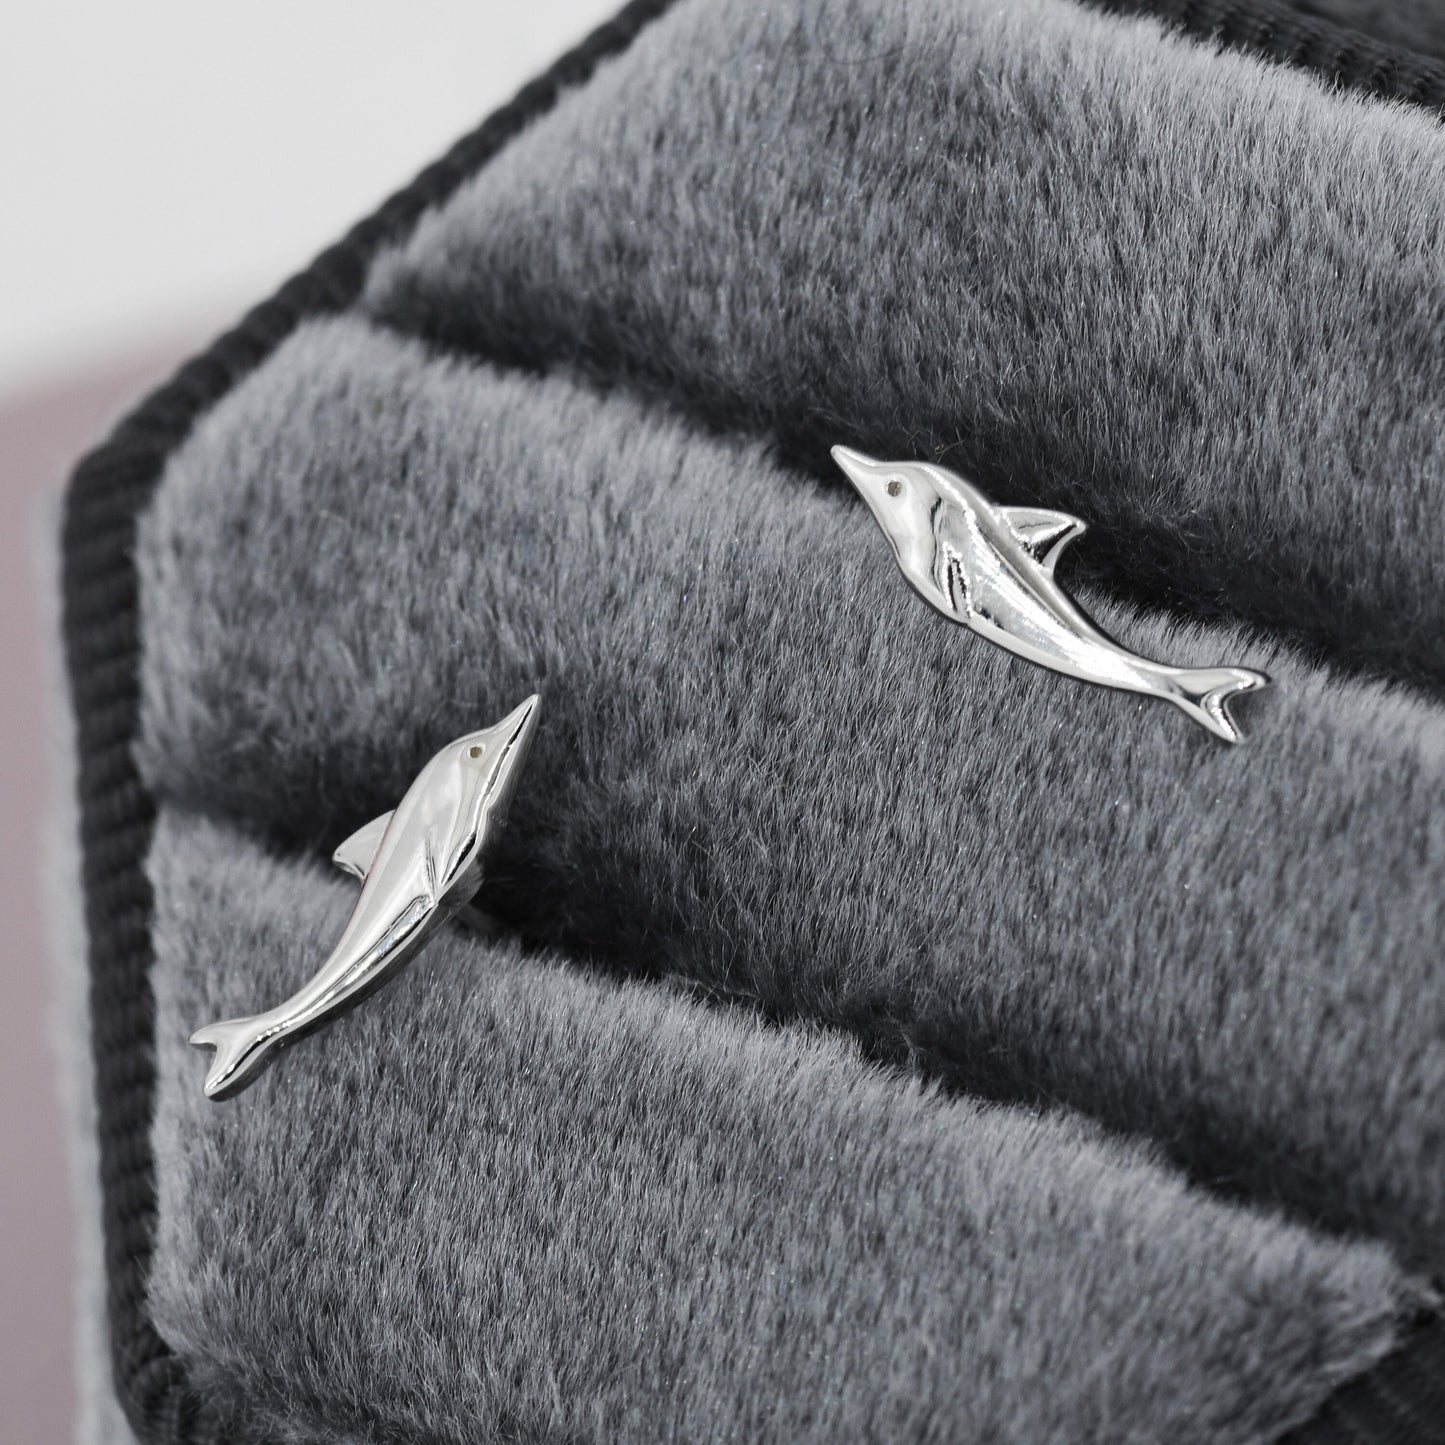 Extra Tiny Dolphin Fish Stud Earrings in Sterling Silver, Dolphin Earrings,  Nature Inspired Animal Earrings